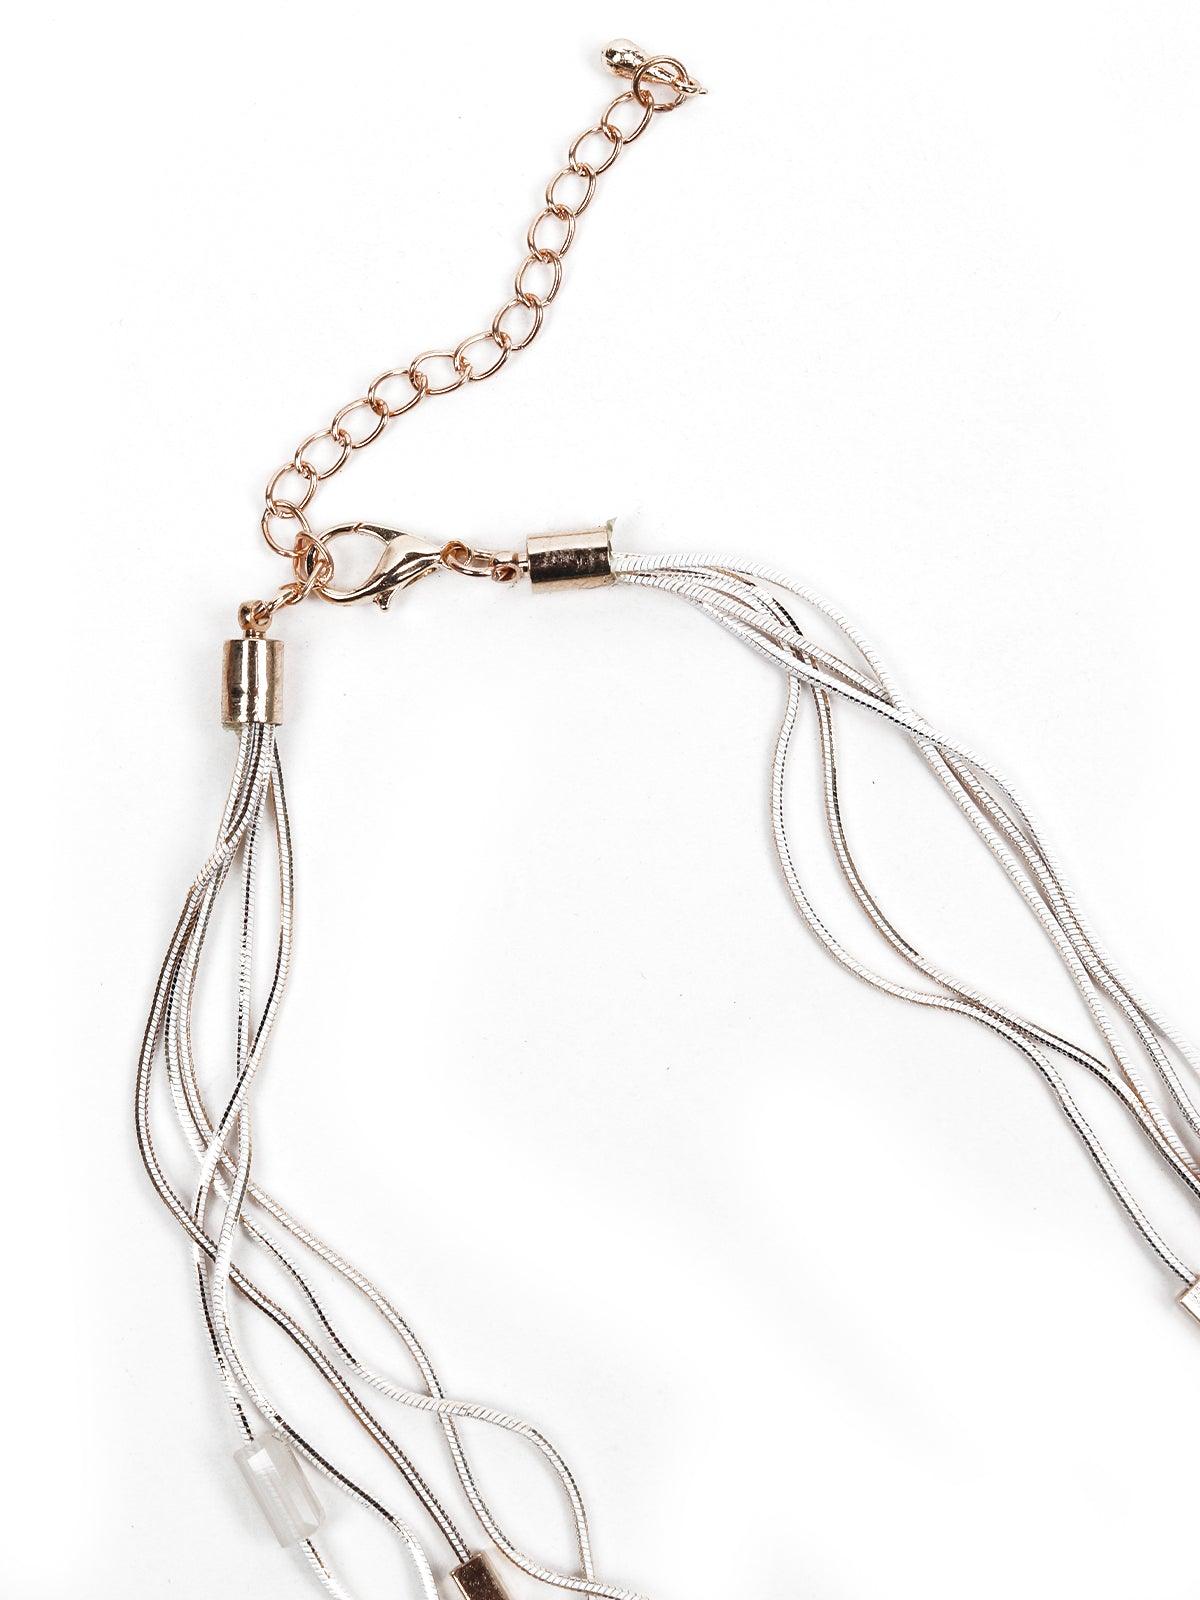 Women's Whimsical Silver Multilayered Necklace - Odette